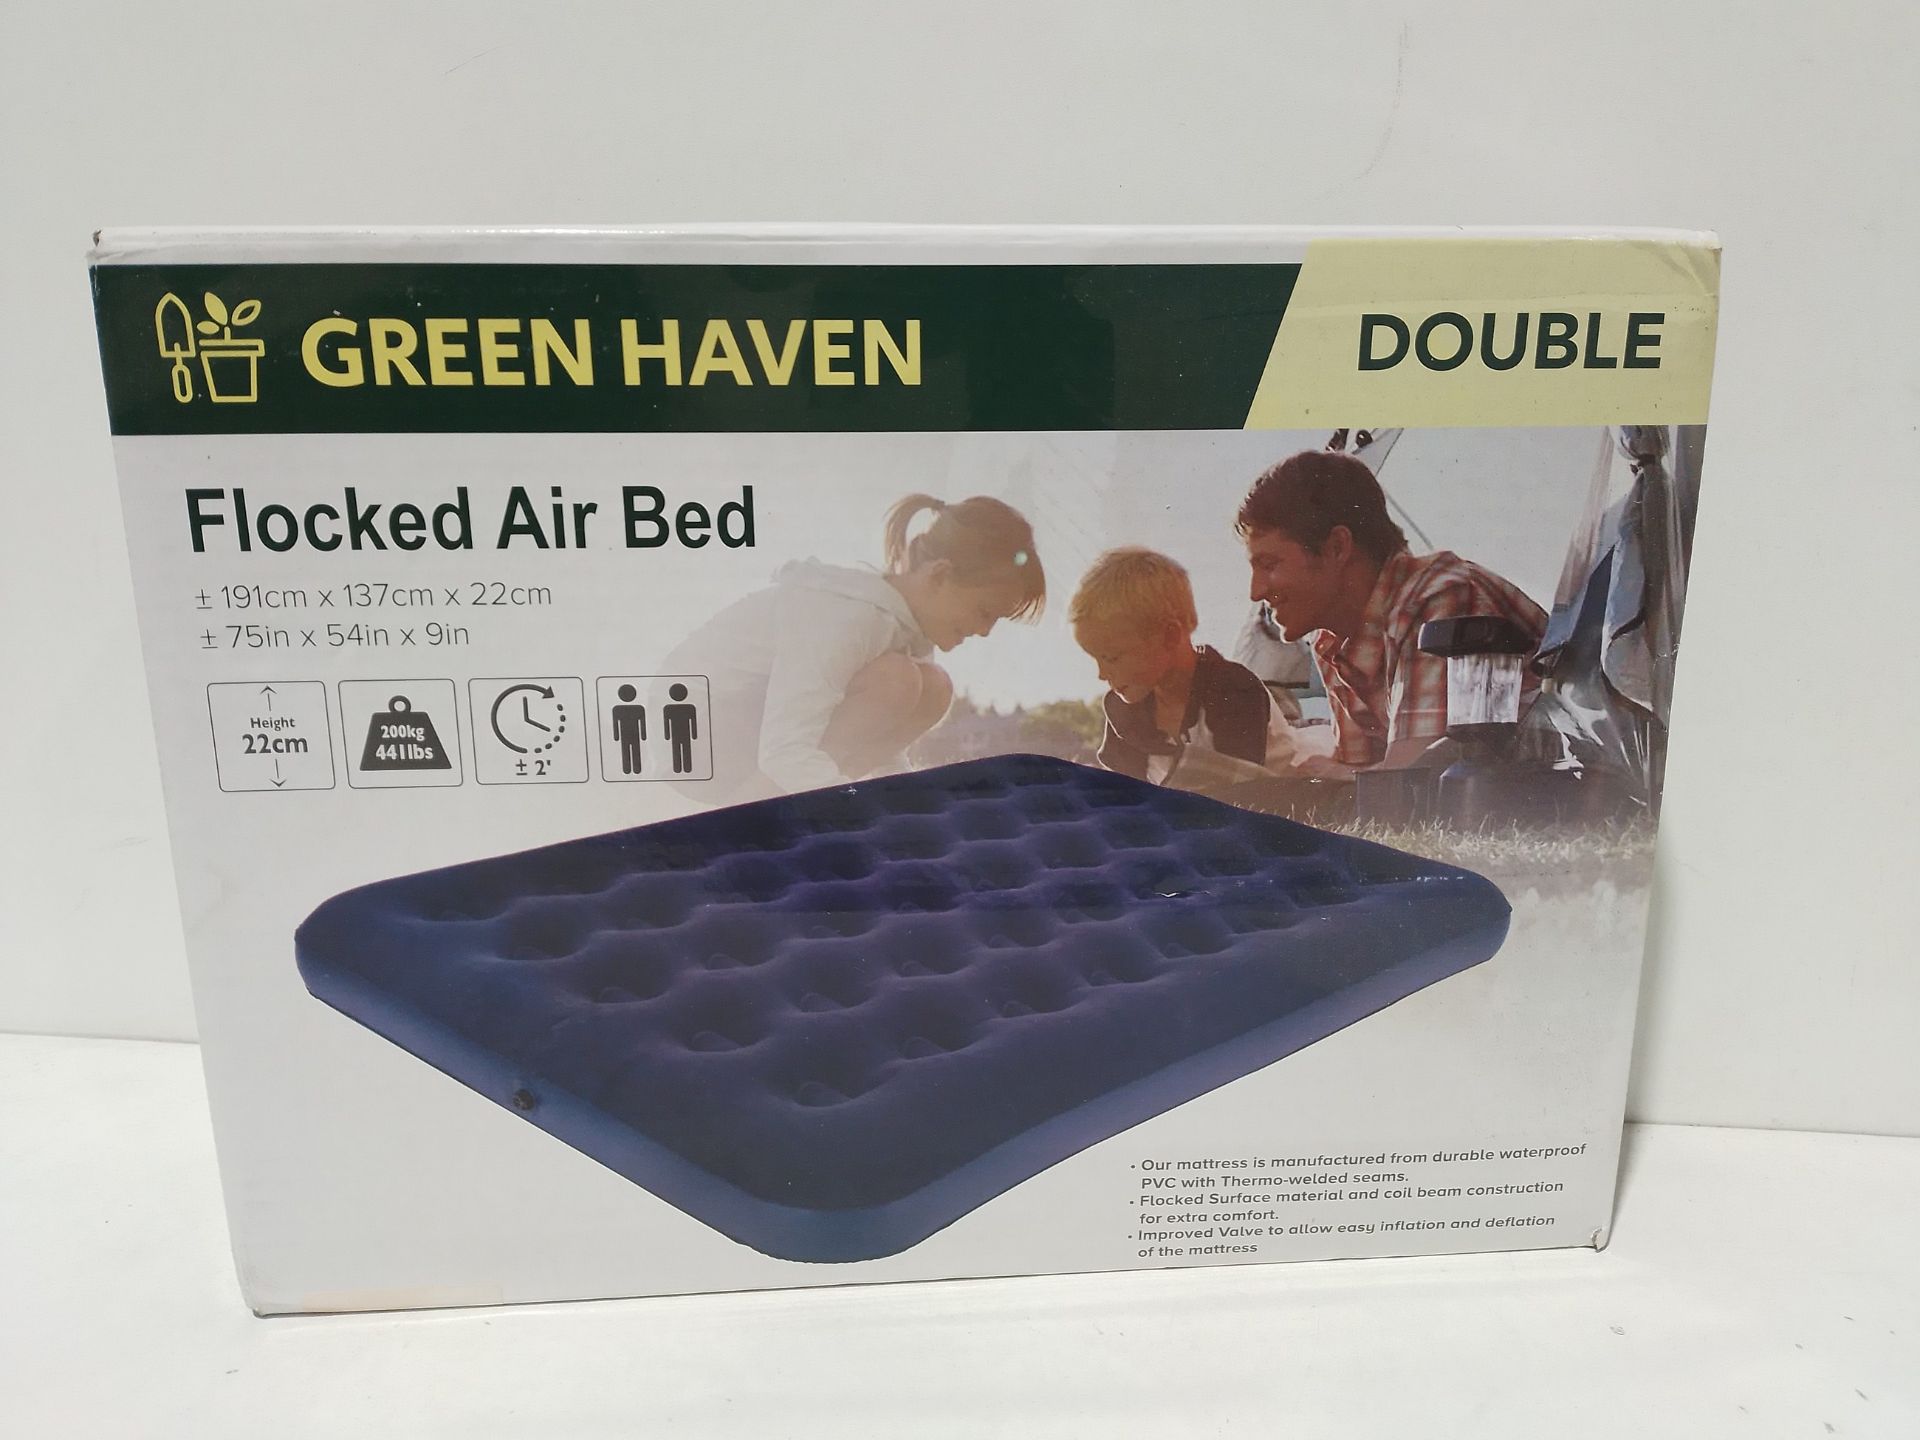 RRP £30.14 Premium Extra Comfortable Blow up Double Airbed | Waterproof - Image 2 of 2